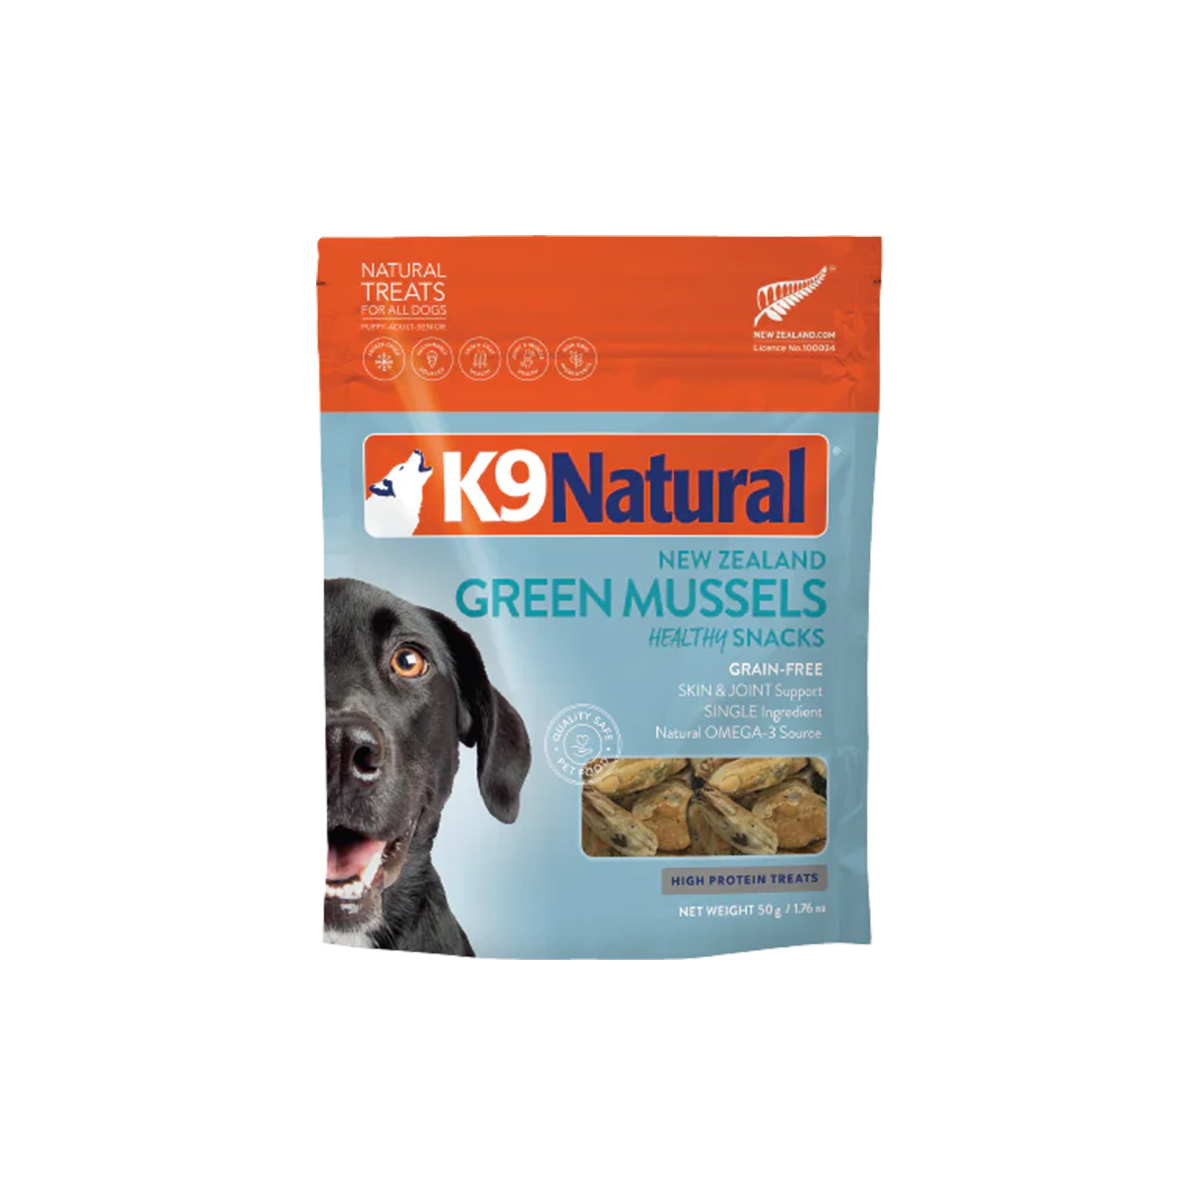 K9 Natural Freeze-Dried Healthy Bites Dog Treats - Green Mussels